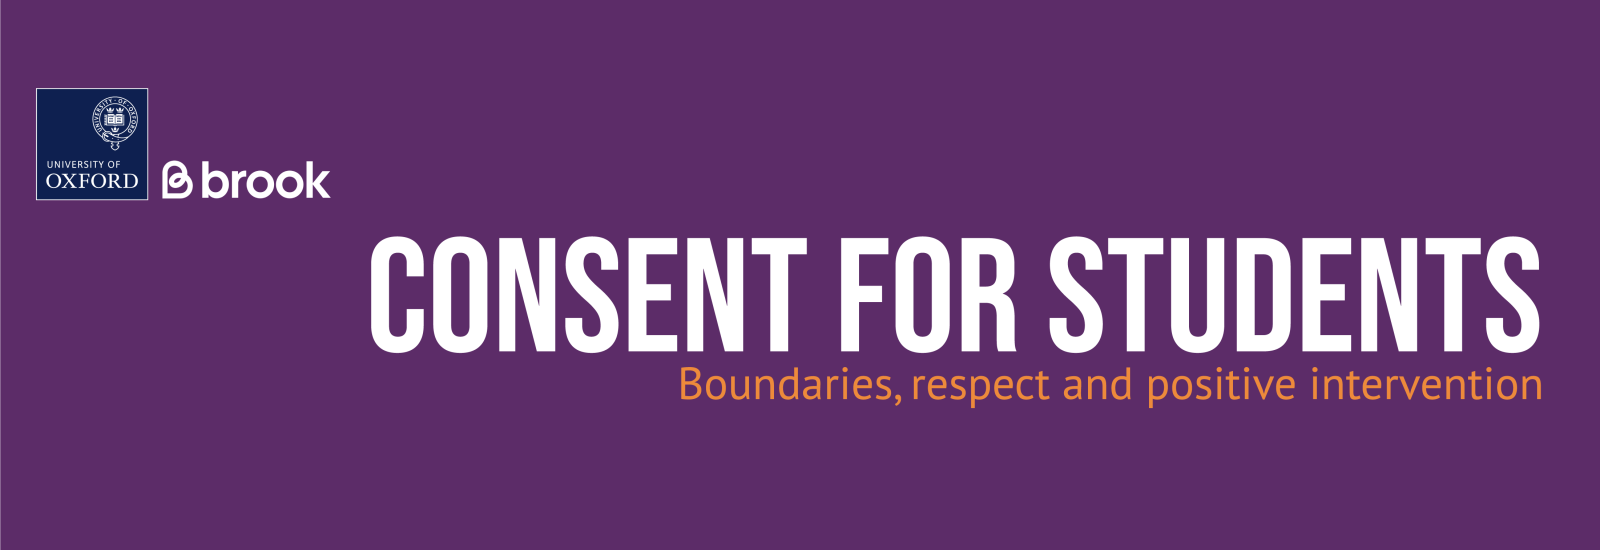 Consent for Students: boundaries, respect and positive intervention